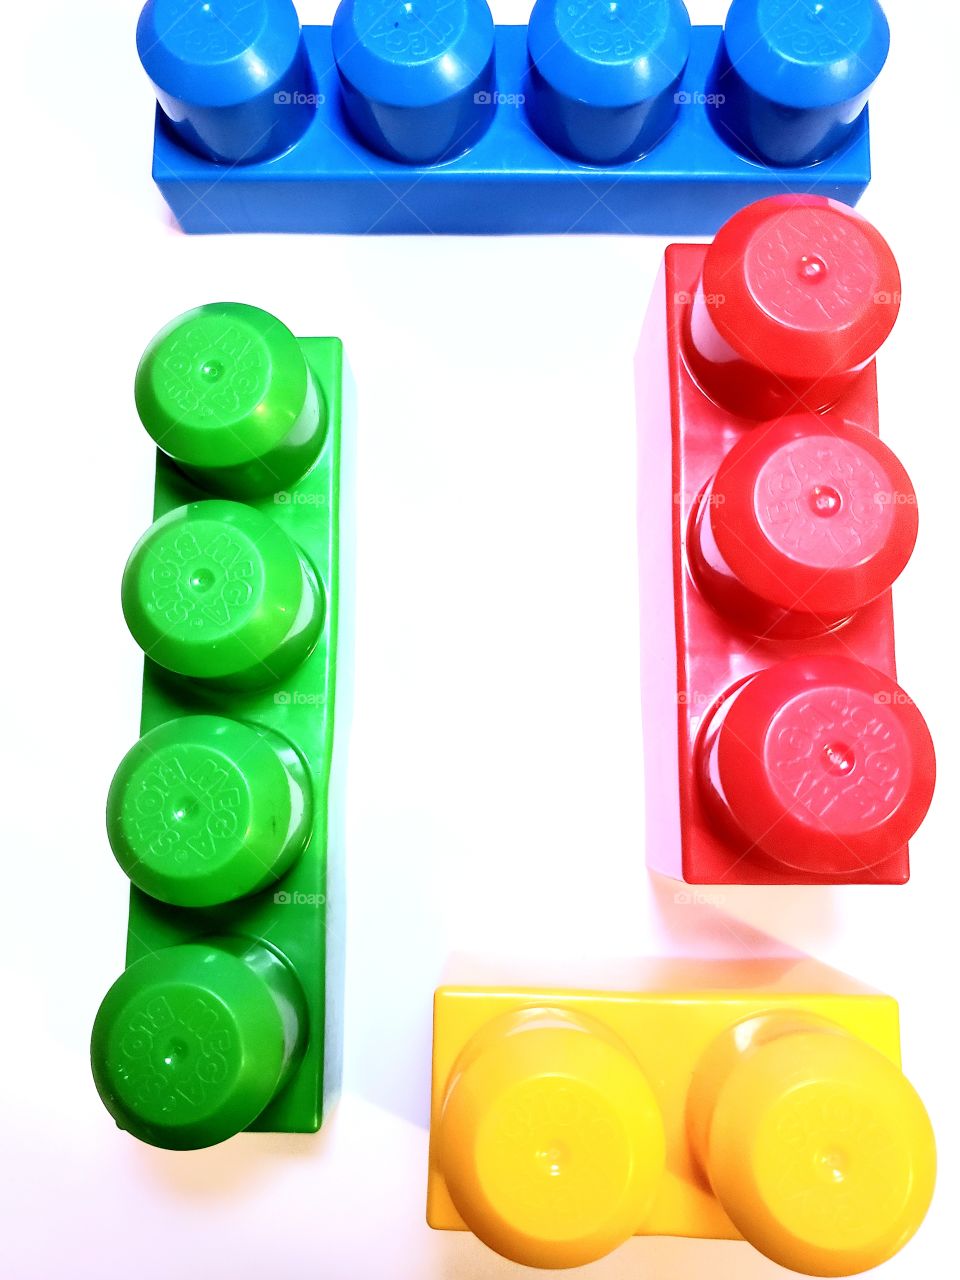 Colorful, children's, toys, in the shape of rectangles.